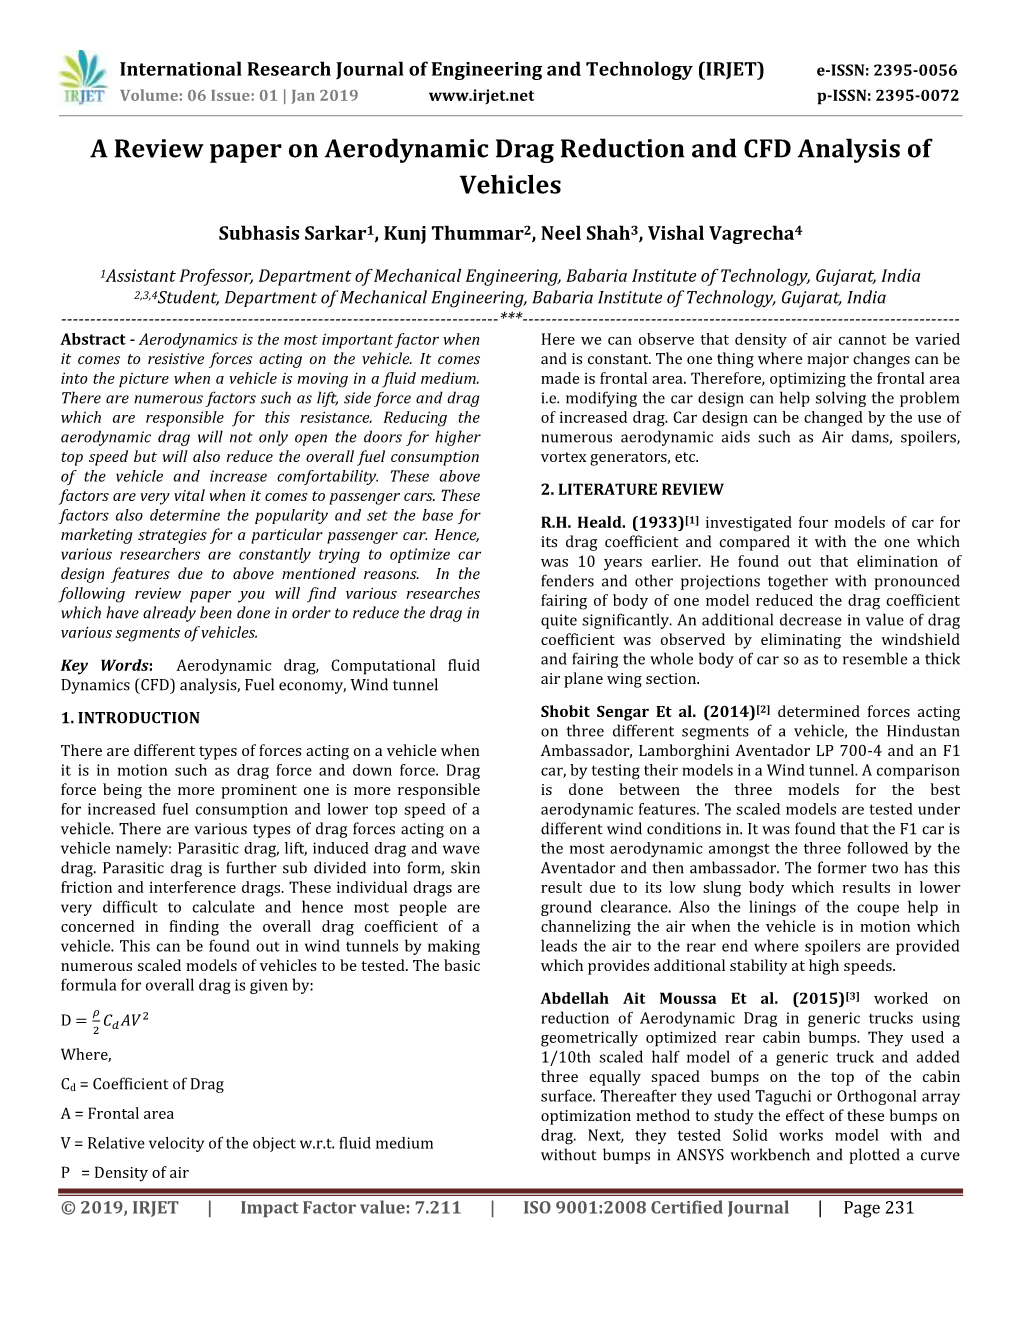 A Review Paper on Aerodynamic Drag Reduction and CFD Analysis of Vehicles